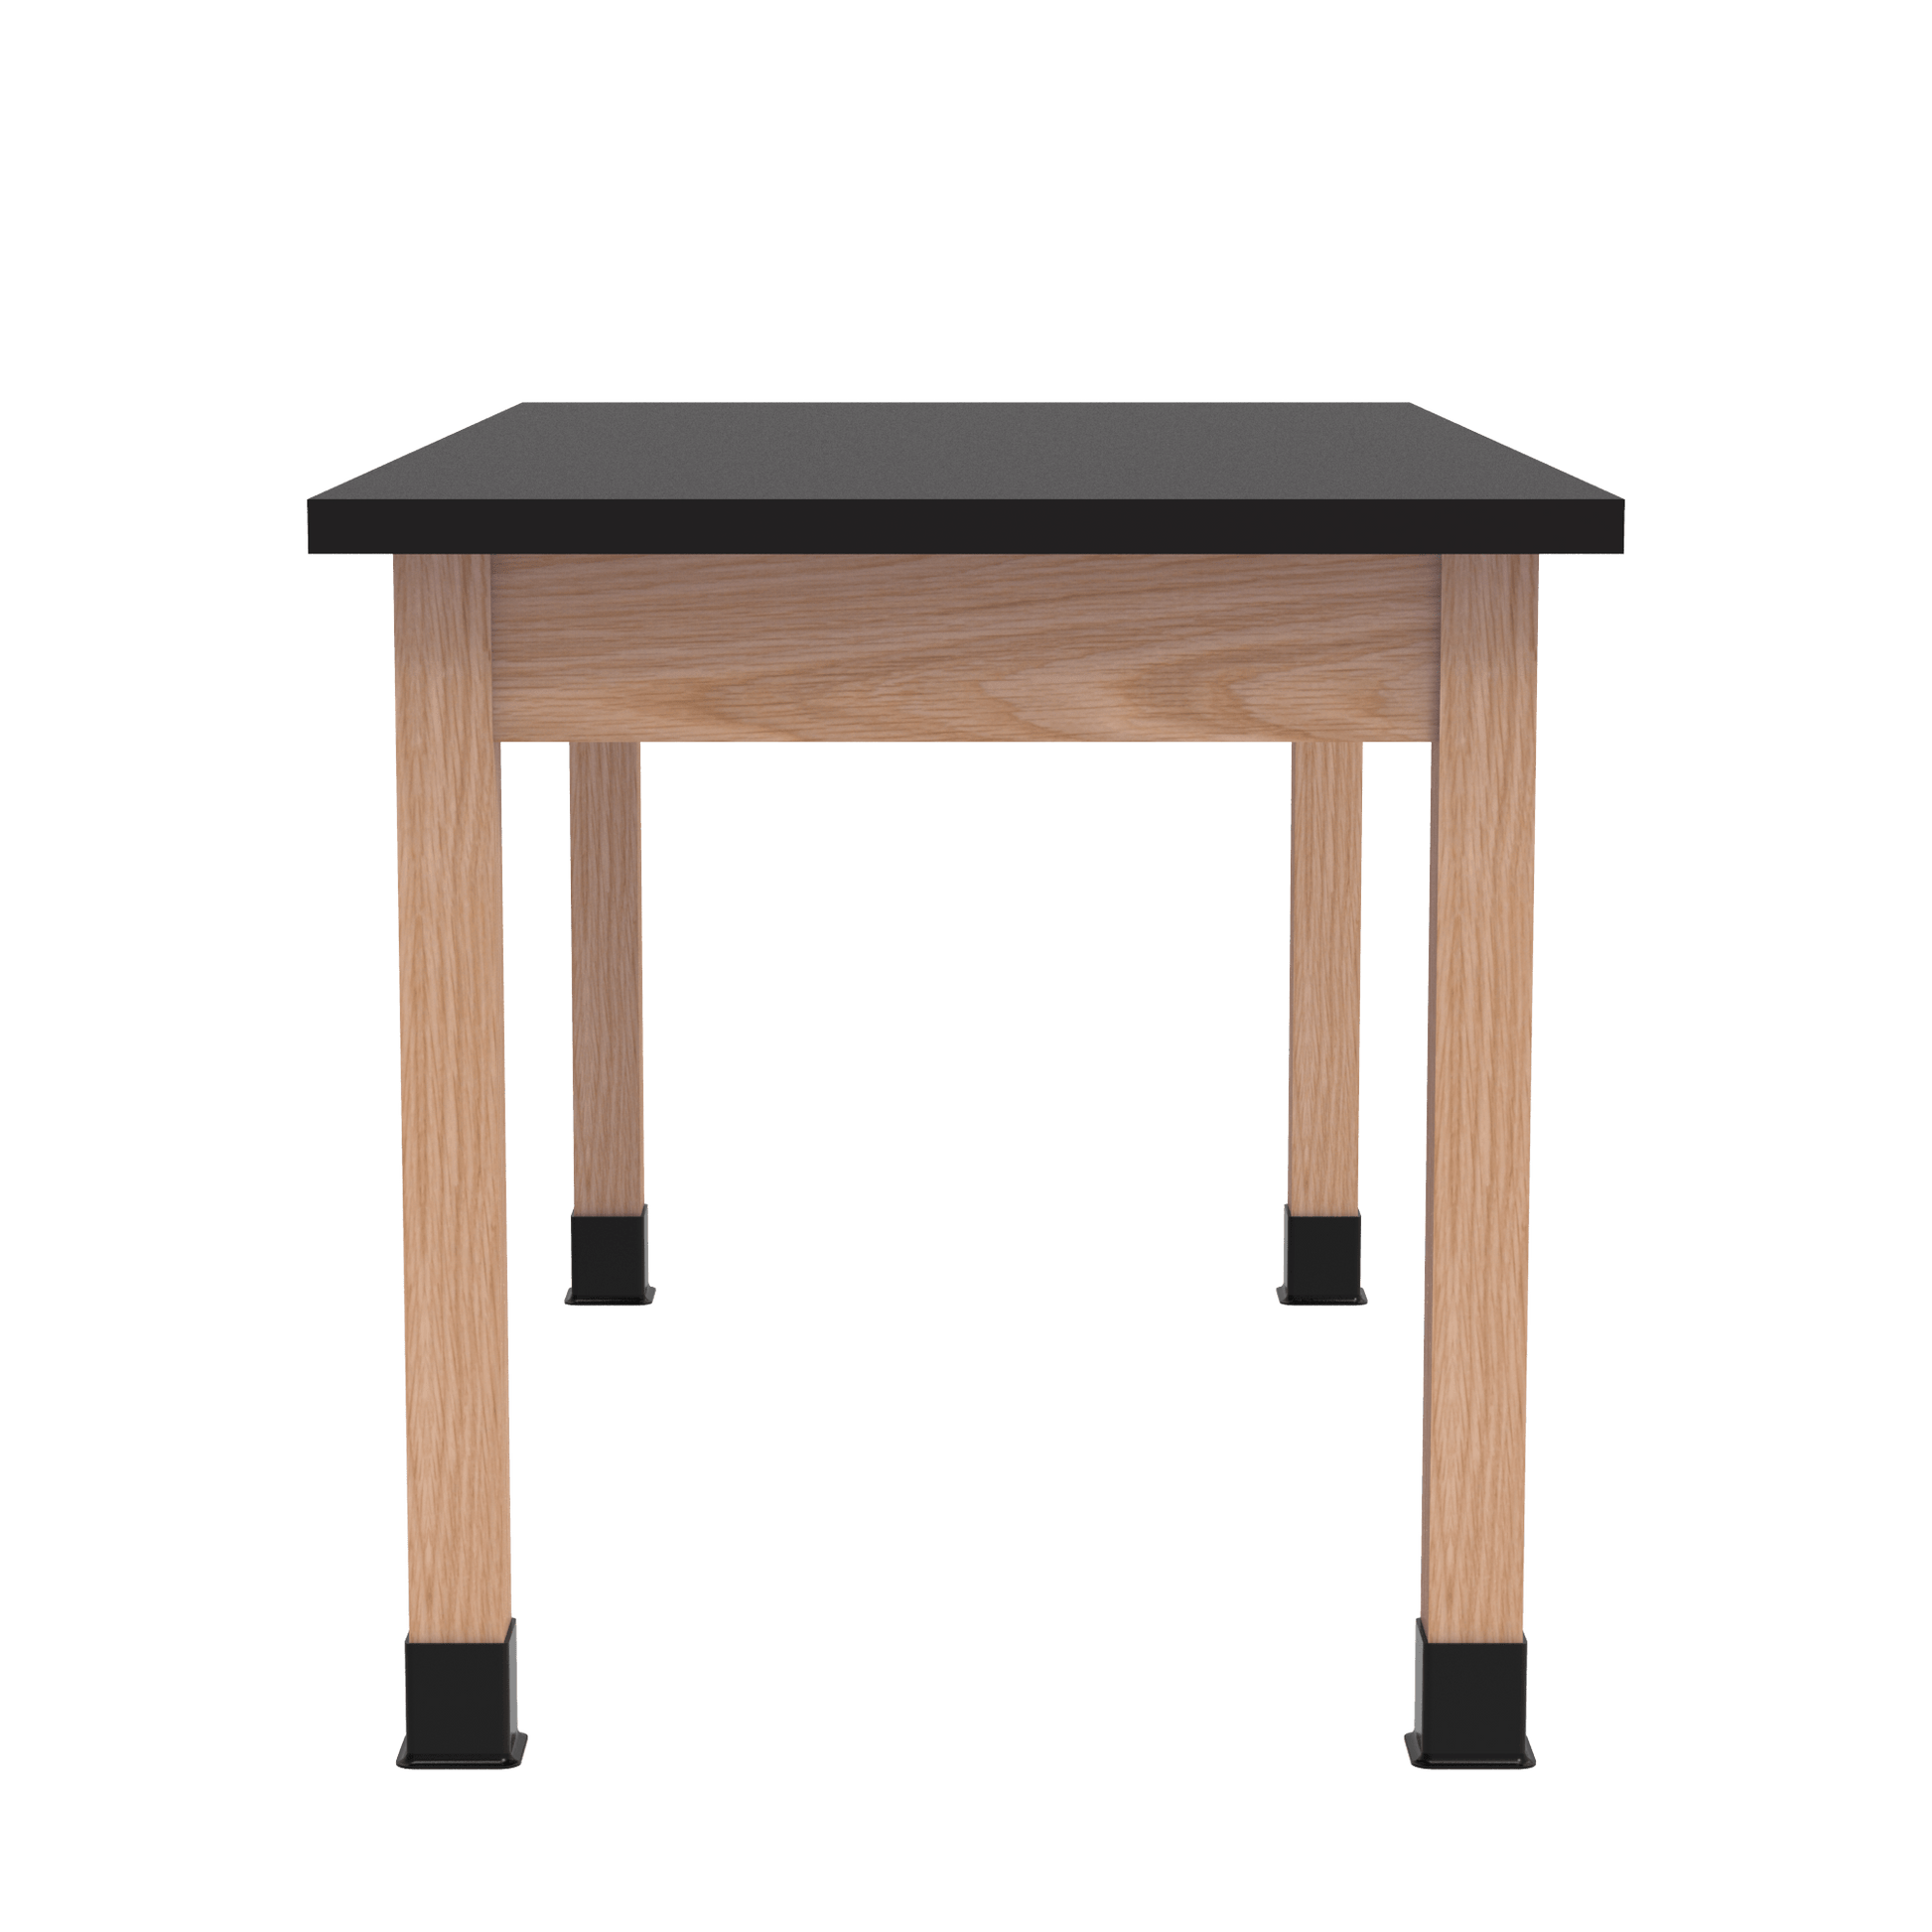 Diversified Woodcrafts Science Table w/ Book Compartment - 48" W x 36" D - Solid Oak Frame and Adjustable Glides - SchoolOutlet